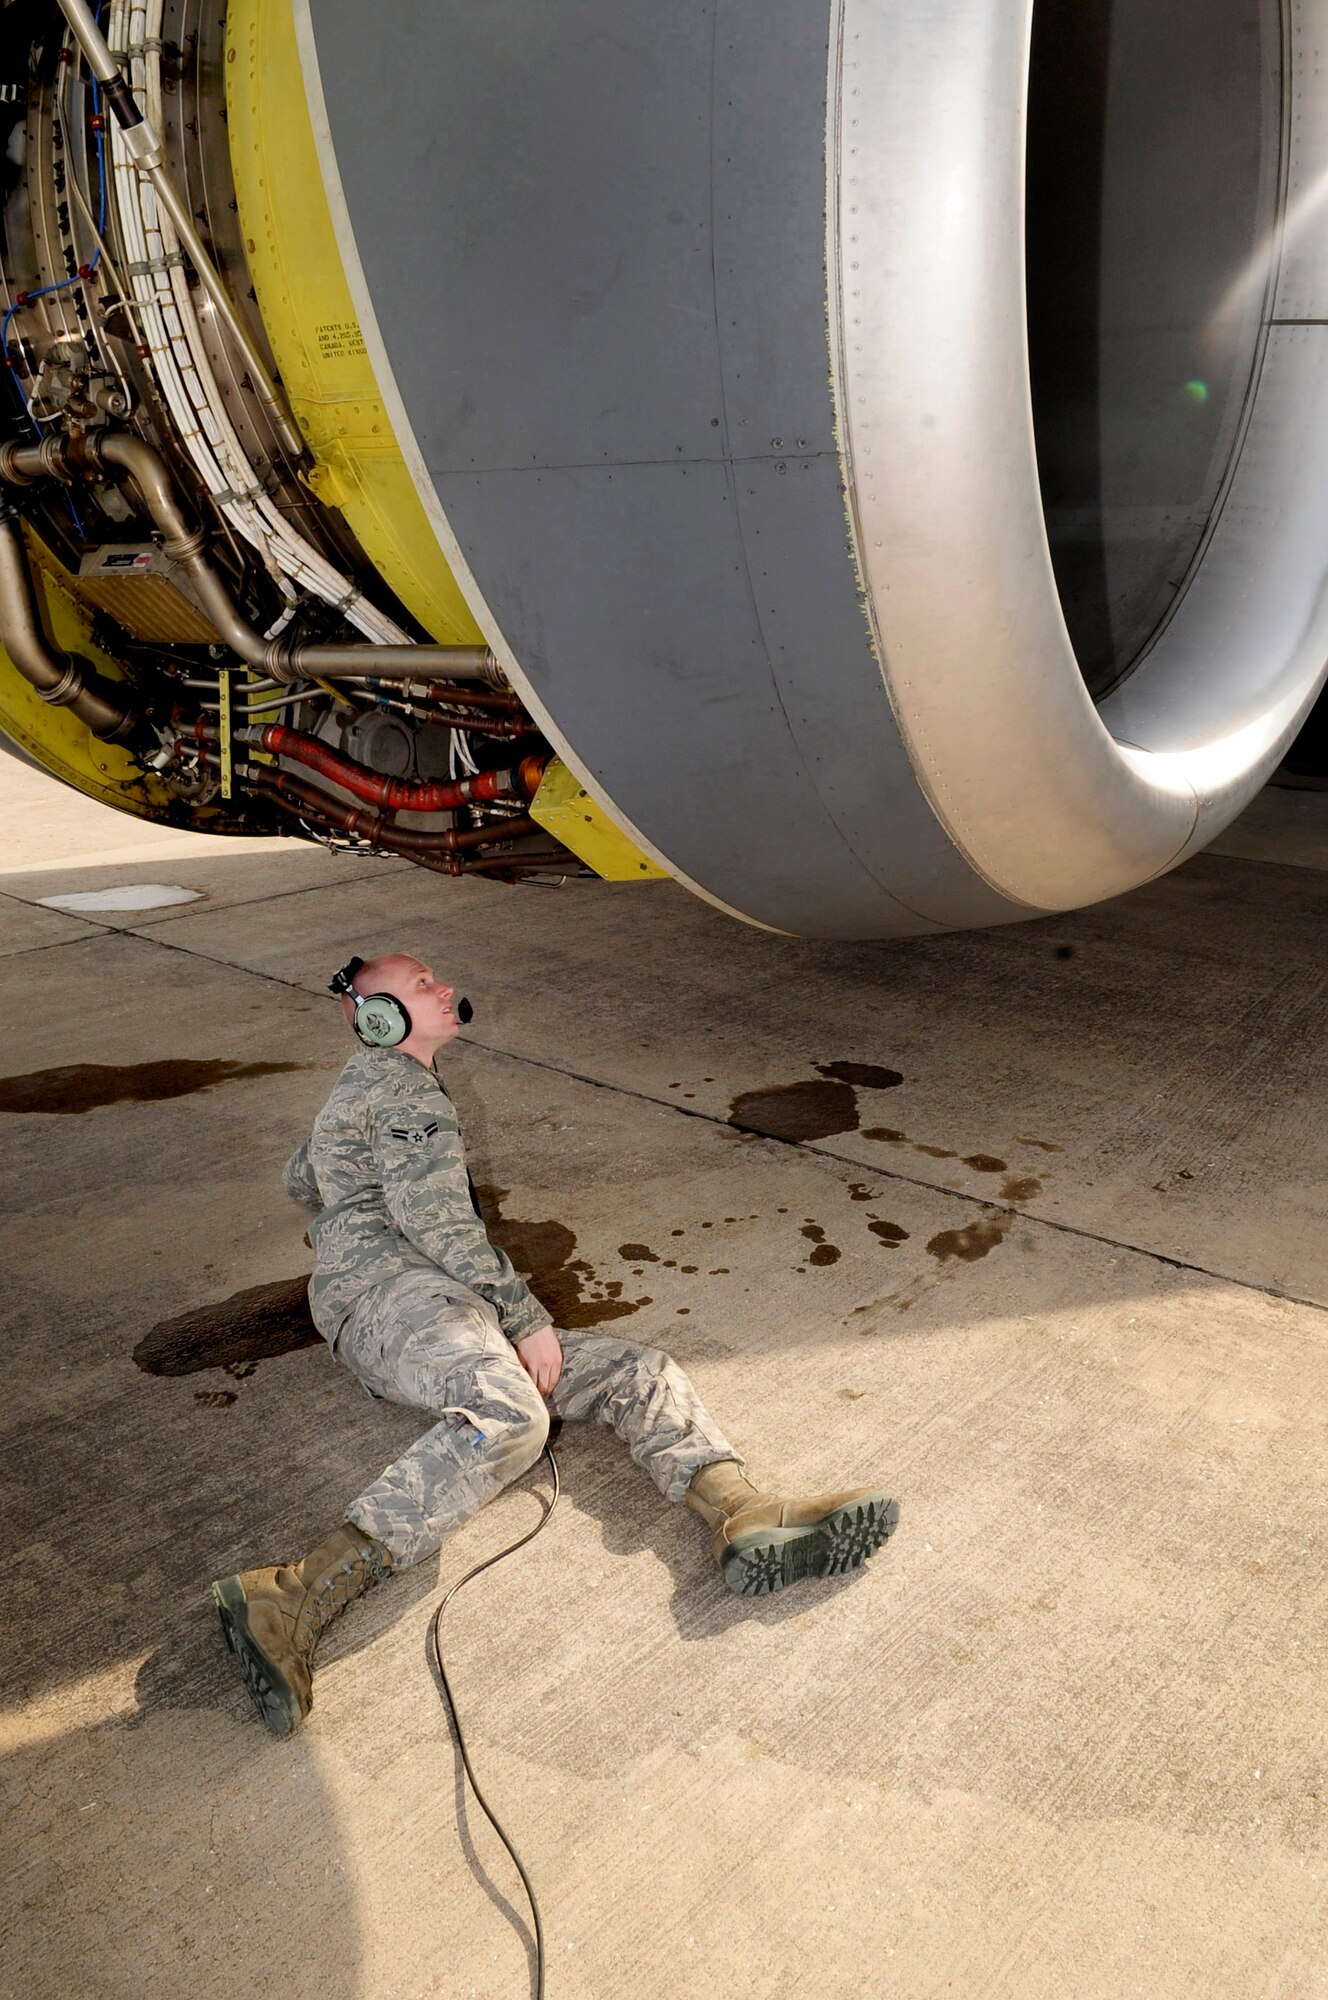 313TH AIR EXPEDITIONARY WING -- A 92nd Aircraft Maintenance Squadron jet mechanic from Fairchild Air Force Base, Wash., inspects a KC-135 engine here during an engine run in support of Joint Task Force Odyssey Dawn March 26. Joint Task Force Odyssey Dawn is the U.S. Africa Command task force established to provide operational and tactical command and control of U.S. military forces supporting the international response to the unrest in Libya and enforcement of United Nations Security Council Resolution (UNSCR) 1973. UNSCR 1973 authorizes all necessary measures to protect civilians in Libya under threat of attack by Gadhafi regime forces. JTF Odyssey Dawn is commanded by U.S. Navy Admiral Samuel J. Locklear, III. (U.S. Air Force photo/Senior Airman Ethan Morgan)